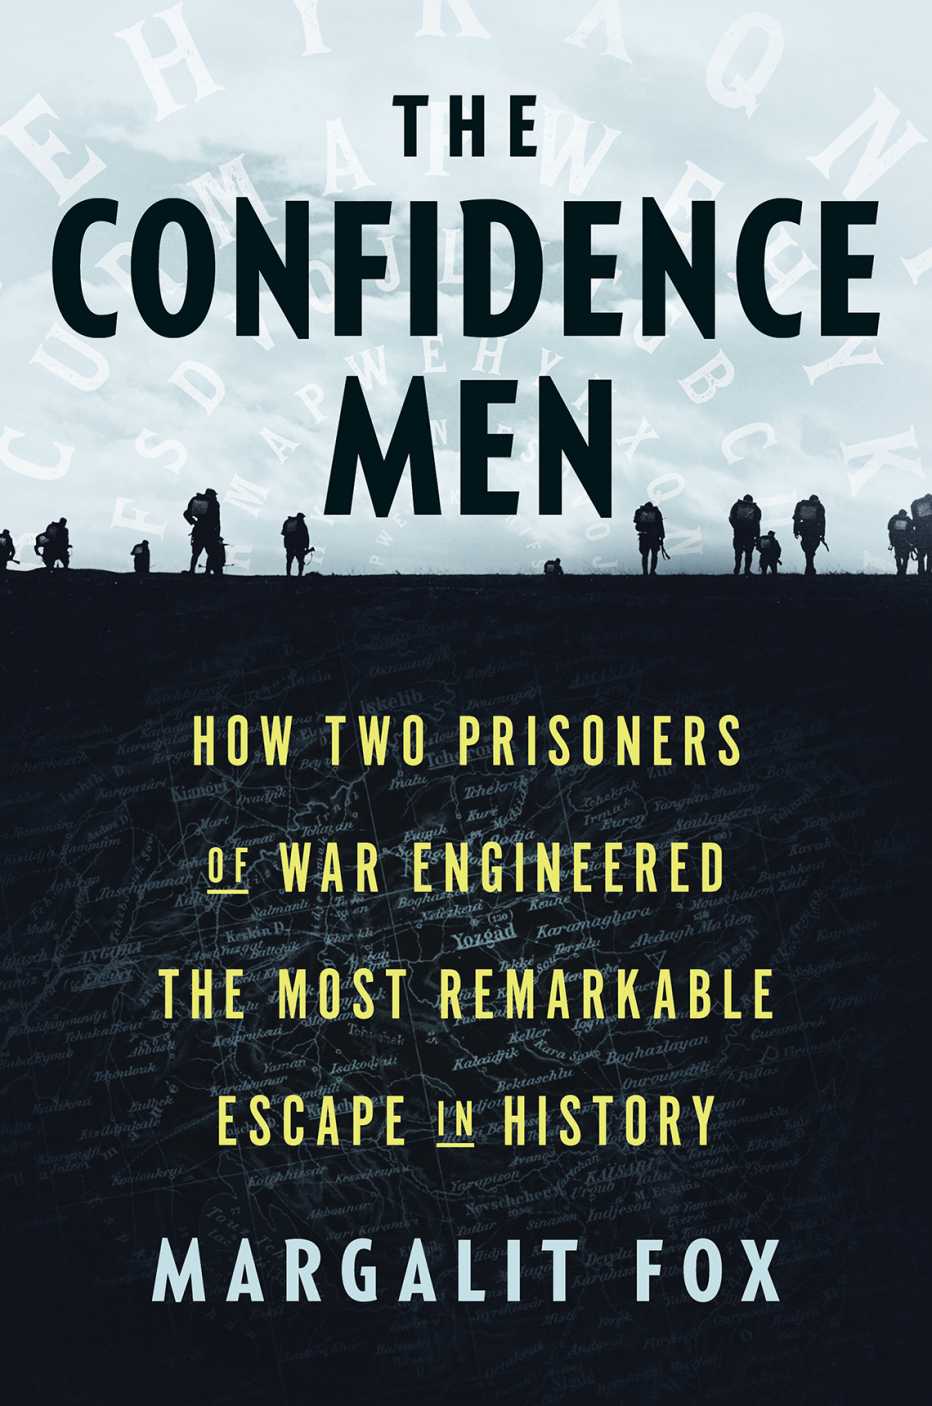 the confidence men how two prisoners of war engineered the most remarkable escape in history by margalit fox  